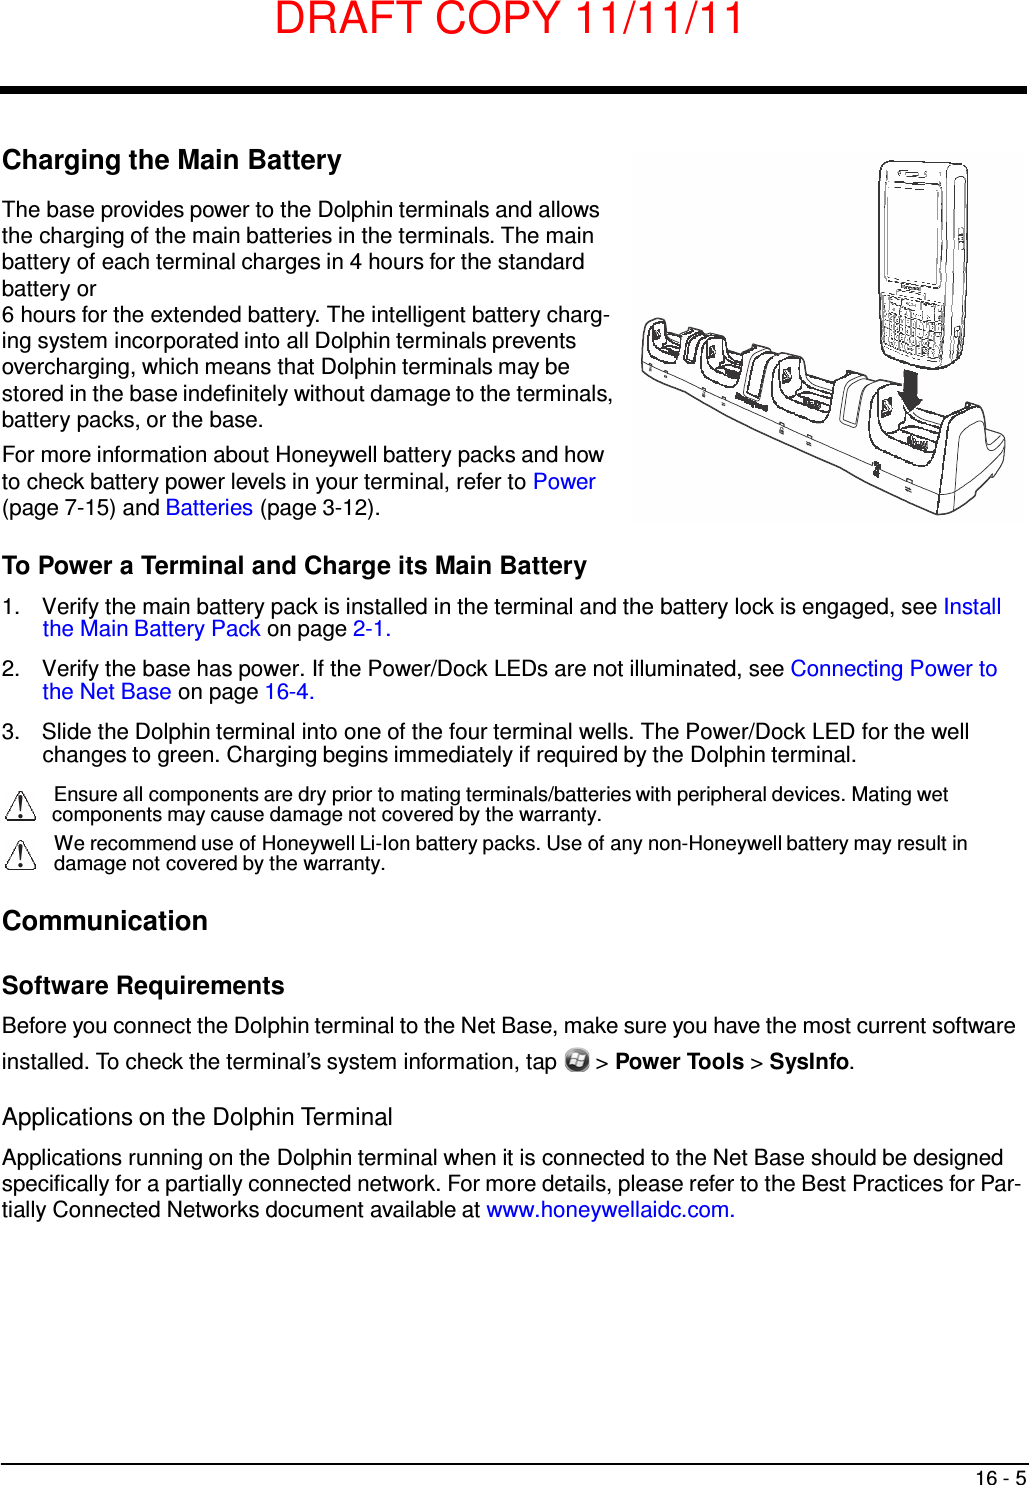 DRAFT COPY 11/11/11 16 - 5       Charging the Main Battery  The base provides power to the Dolphin terminals and allows the charging of the main batteries in the terminals. The main battery of each terminal charges in 4 hours for the standard battery or 6 hours for the extended battery. The intelligent battery charg- ing system incorporated into all Dolphin terminals prevents overcharging, which means that Dolphin terminals may be stored in the base indefinitely without damage to the terminals, battery packs, or the base. For more information about Honeywell battery packs and how to check battery power levels in your terminal, refer to Power (page 7-15) and Batteries (page 3-12).  To Power a Terminal and Charge its Main Battery  1.  Verify the main battery pack is installed in the terminal and the battery lock is engaged, see Install the Main Battery Pack on page 2-1.  2.  Verify the base has power. If the Power/Dock LEDs are not illuminated, see Connecting Power to the Net Base on page 16-4.  3.  Slide the Dolphin terminal into one of the four terminal wells. The Power/Dock LED for the well changes to green. Charging begins immediately if required by the Dolphin terminal.  Ensure all components are dry prior to mating terminals/batteries with peripheral devices. Mating wet components may cause damage not covered by the warranty. We recommend use of Honeywell Li-Ion battery packs. Use of any non-Honeywell battery may result in damage not covered by the warranty.   Communication   Software Requirements  Before you connect the Dolphin terminal to the Net Base, make sure you have the most current software installed. To check the terminal’s system information, tap  &gt; Power Tools &gt; SysInfo.  Applications on the Dolphin Terminal  Applications running on the Dolphin terminal when it is connected to the Net Base should be designed specifically for a partially connected network. For more details, please refer to the Best Practices for Par- tially Connected Networks document available at www.honeywellaidc.com. 